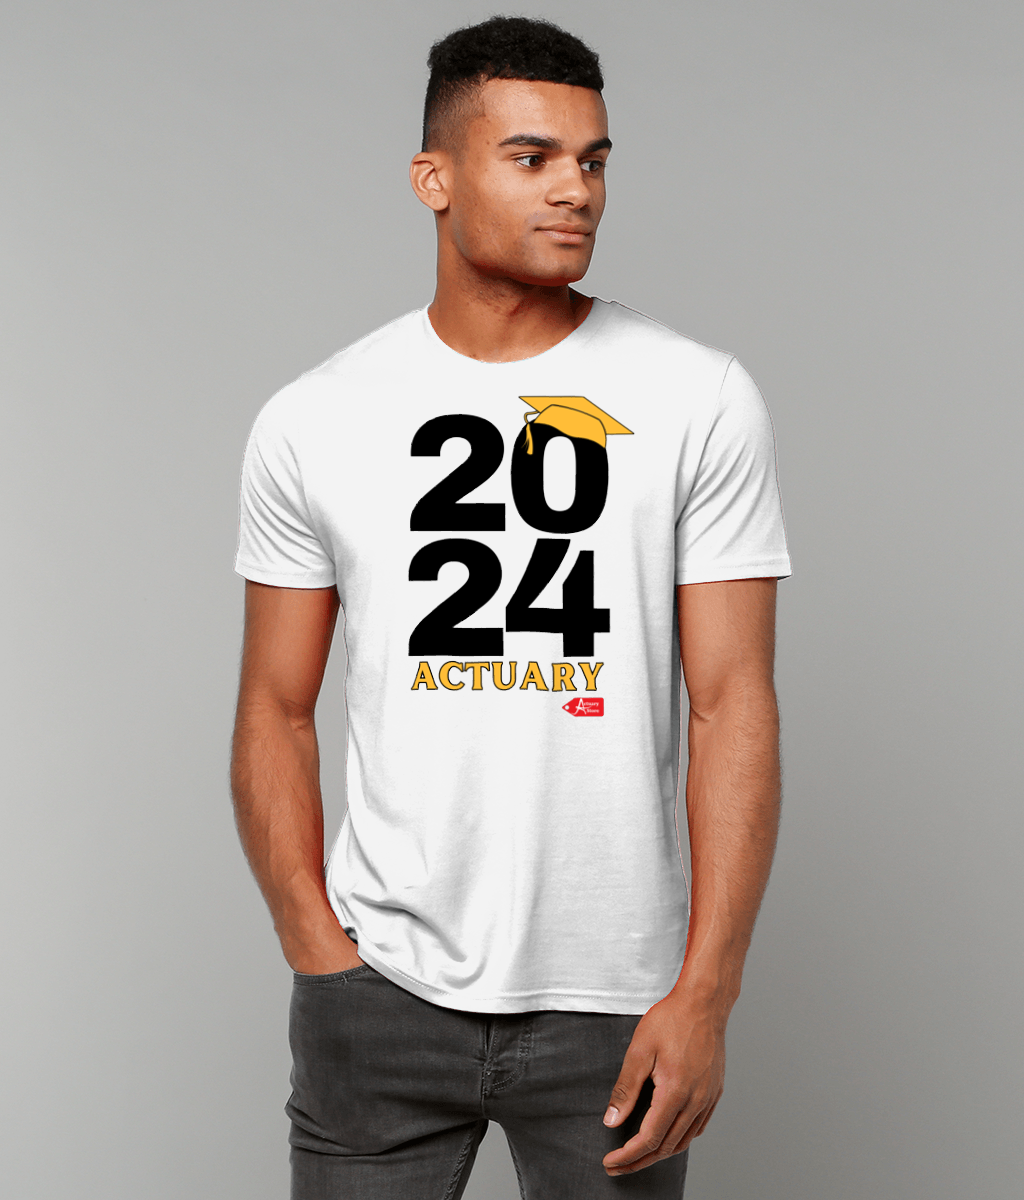 2024 Actuary Qualified White T-Shirt